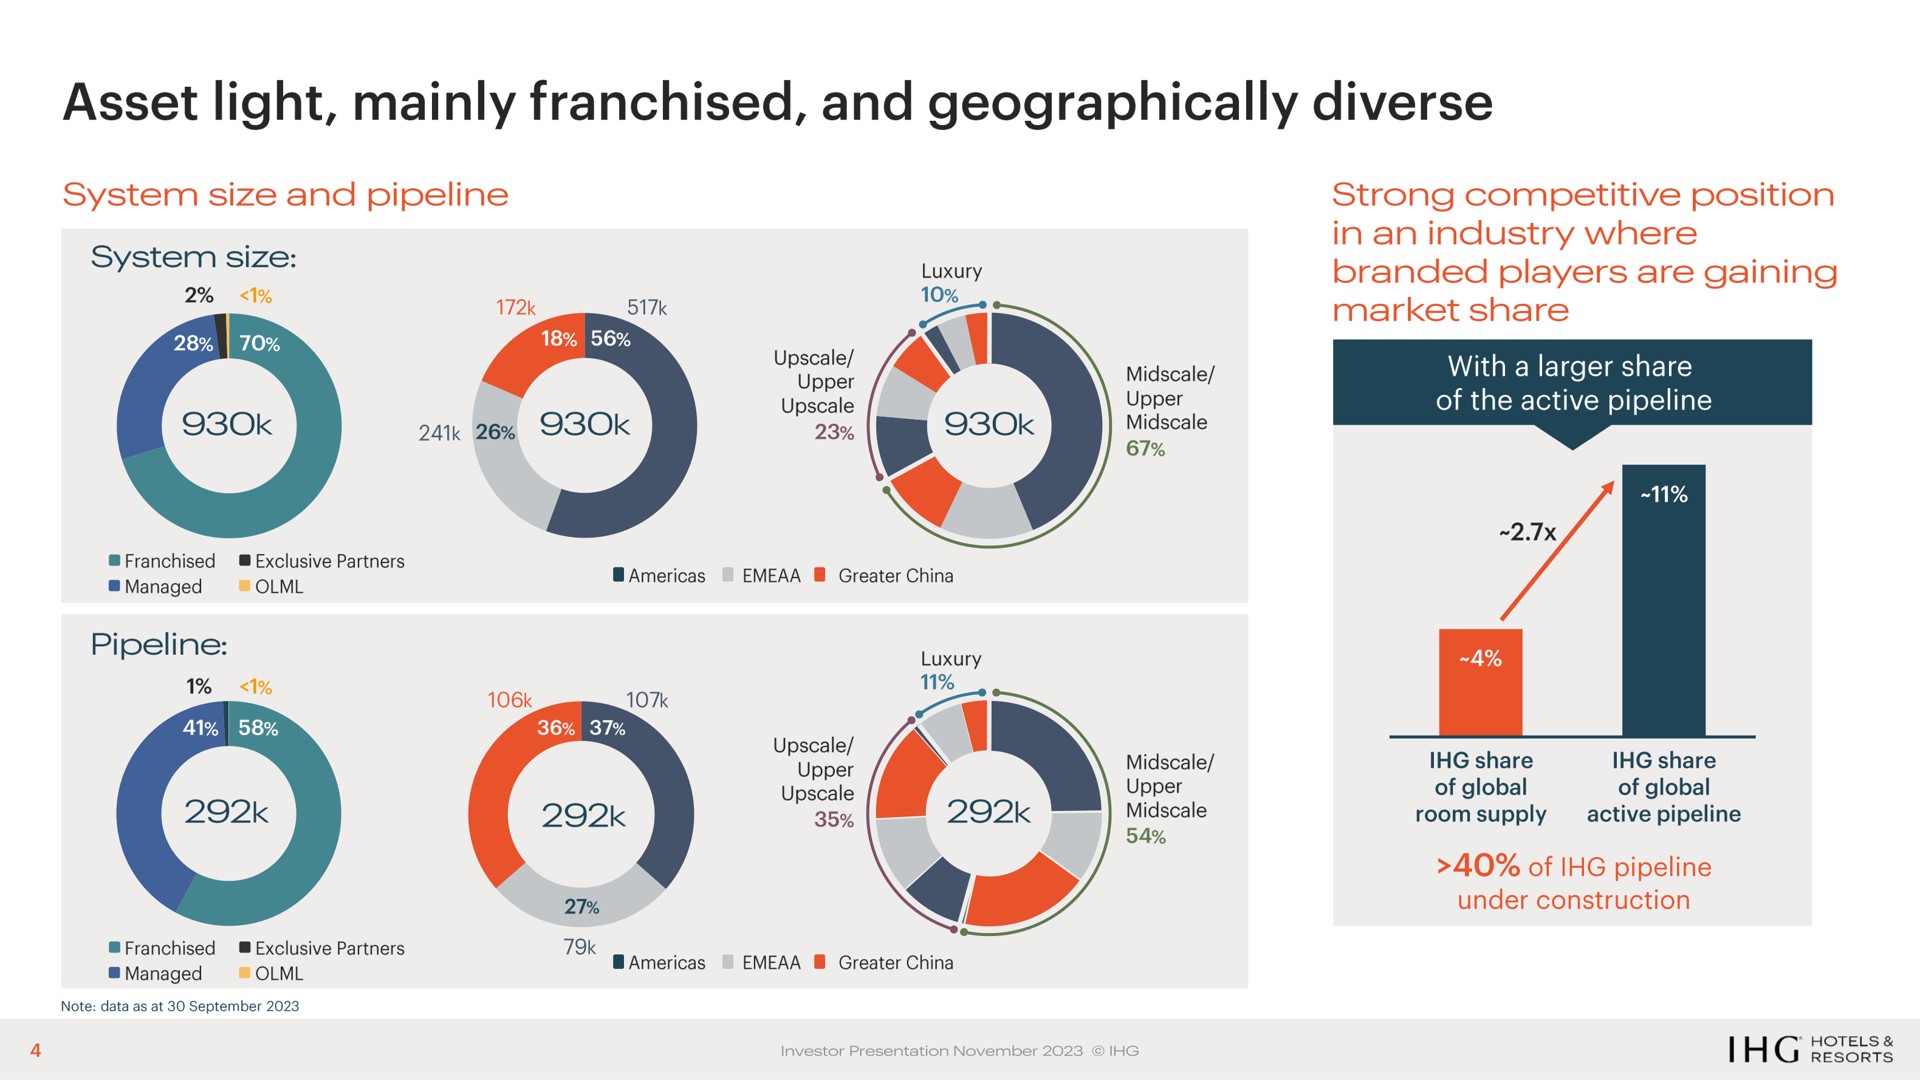 asset light mainly franchised and geographically diverse a | IHG Hotels